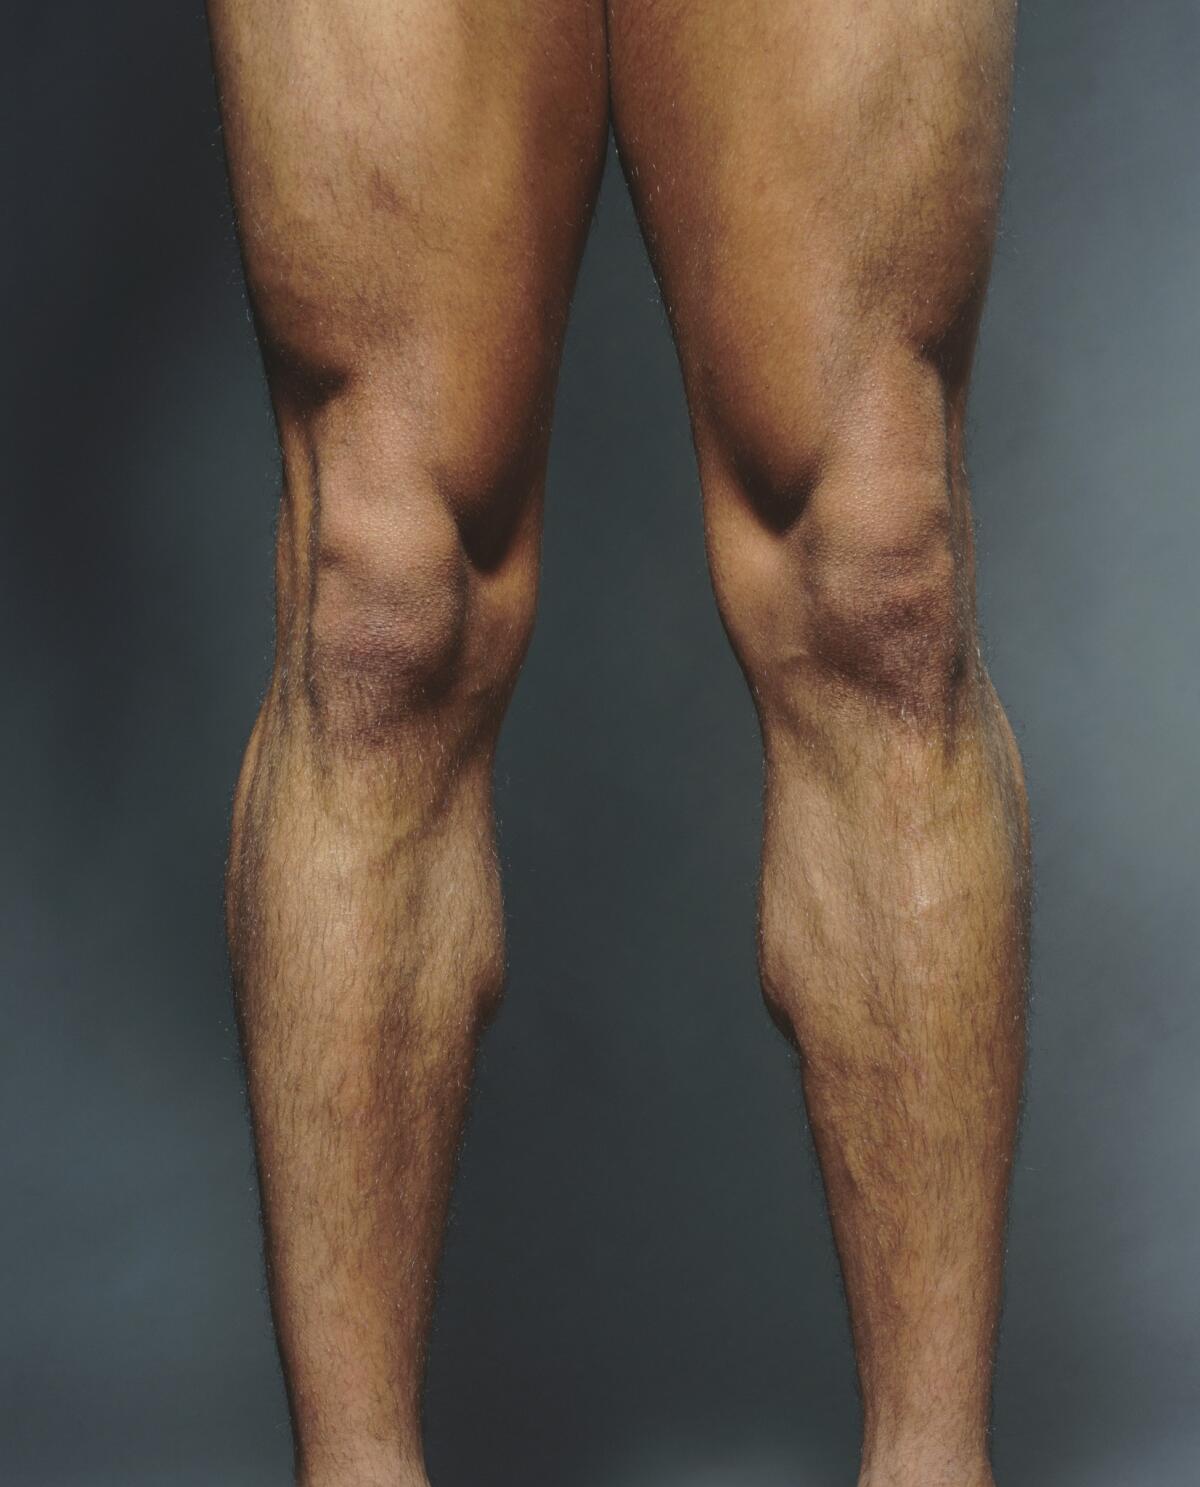 A new study concludes that glucosamine supplementation does not prevent deterioration of knee cartilage or reduce knee pain.